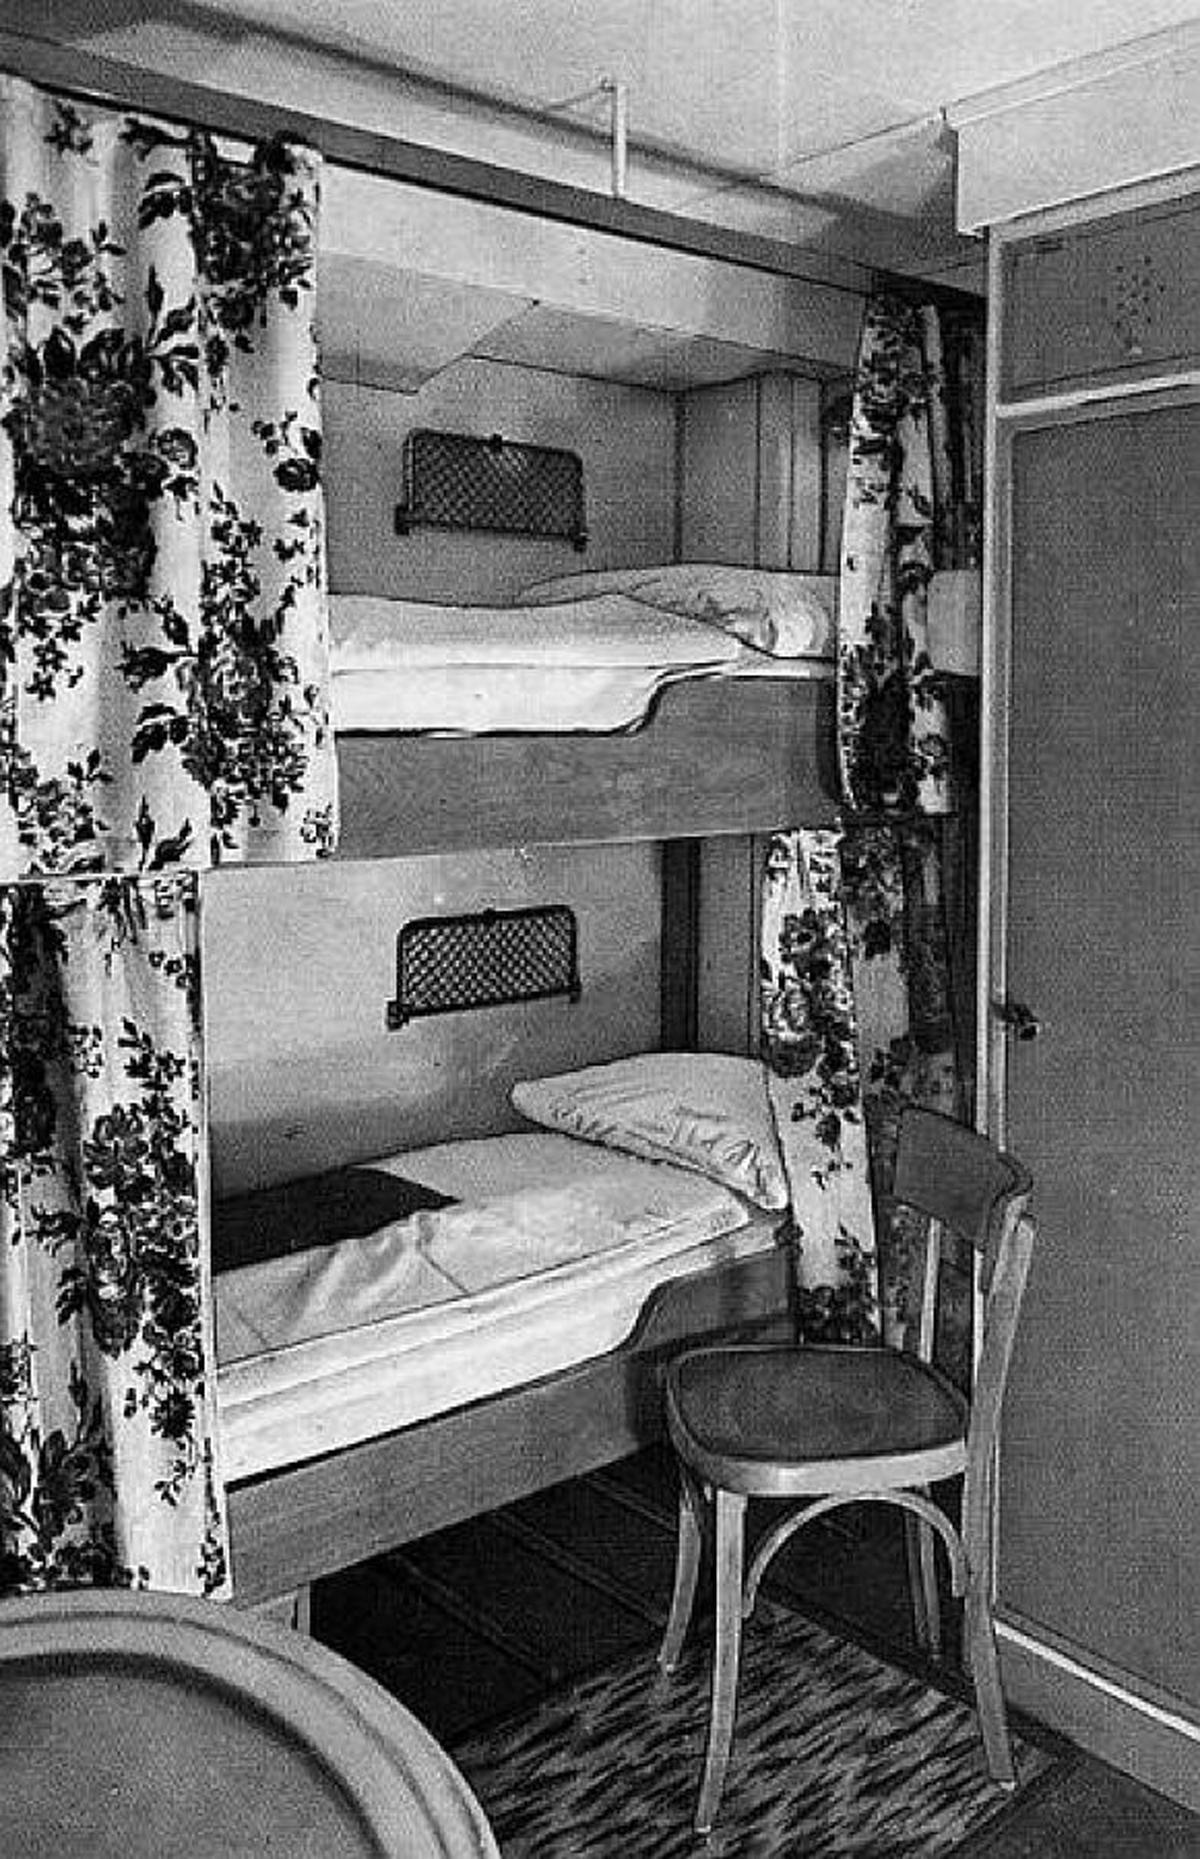 Rare bunk beds from the MS Philippines, ex Augustus. These beds are the original ones built for the Passenger Ship Augustus in 1952 (see the photos in situ and before restoration when I bought them in Alang Shipbreaking Yards India). They are sold